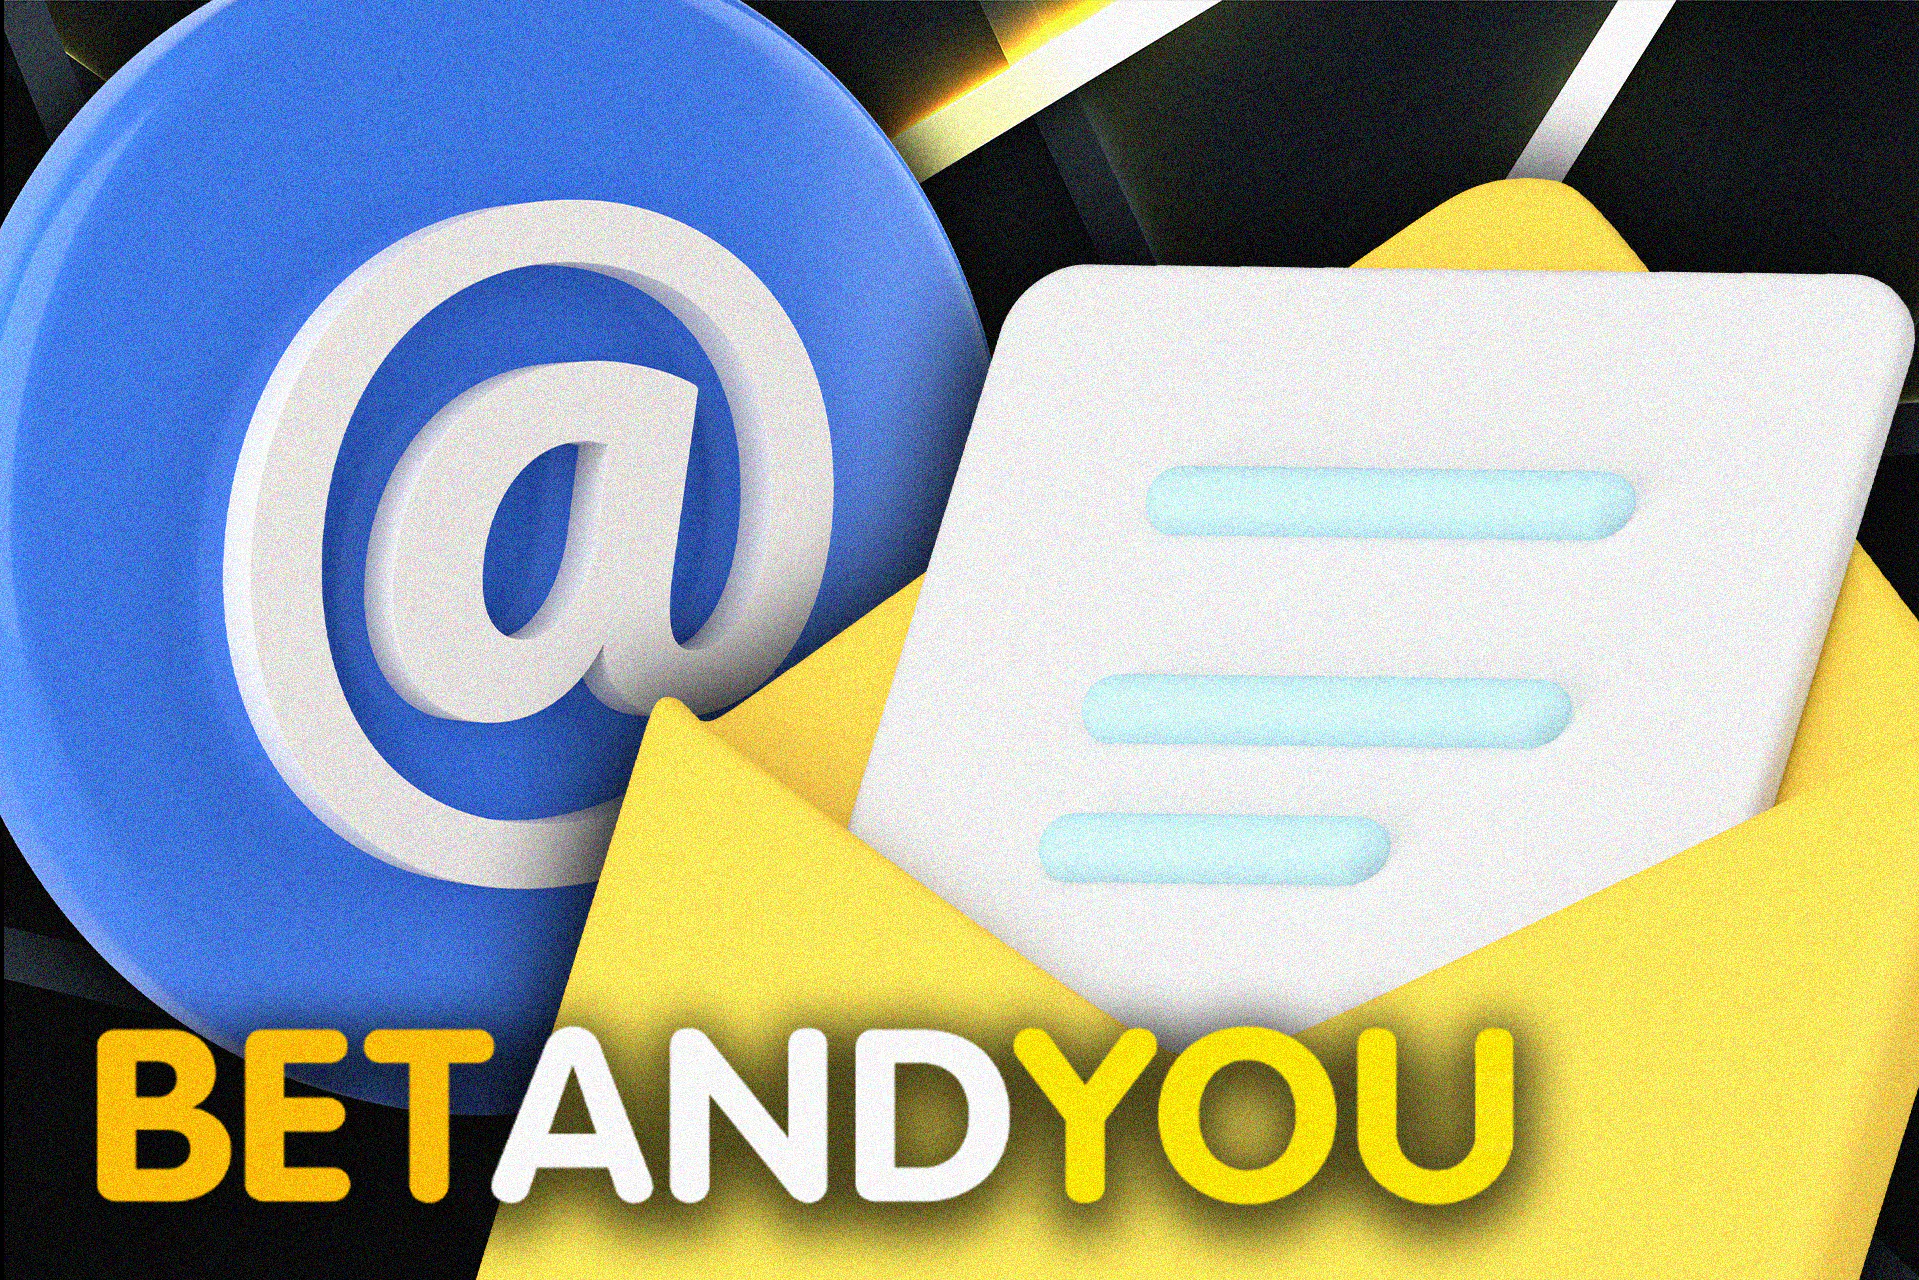 Betandyou has several emails for different purposes.